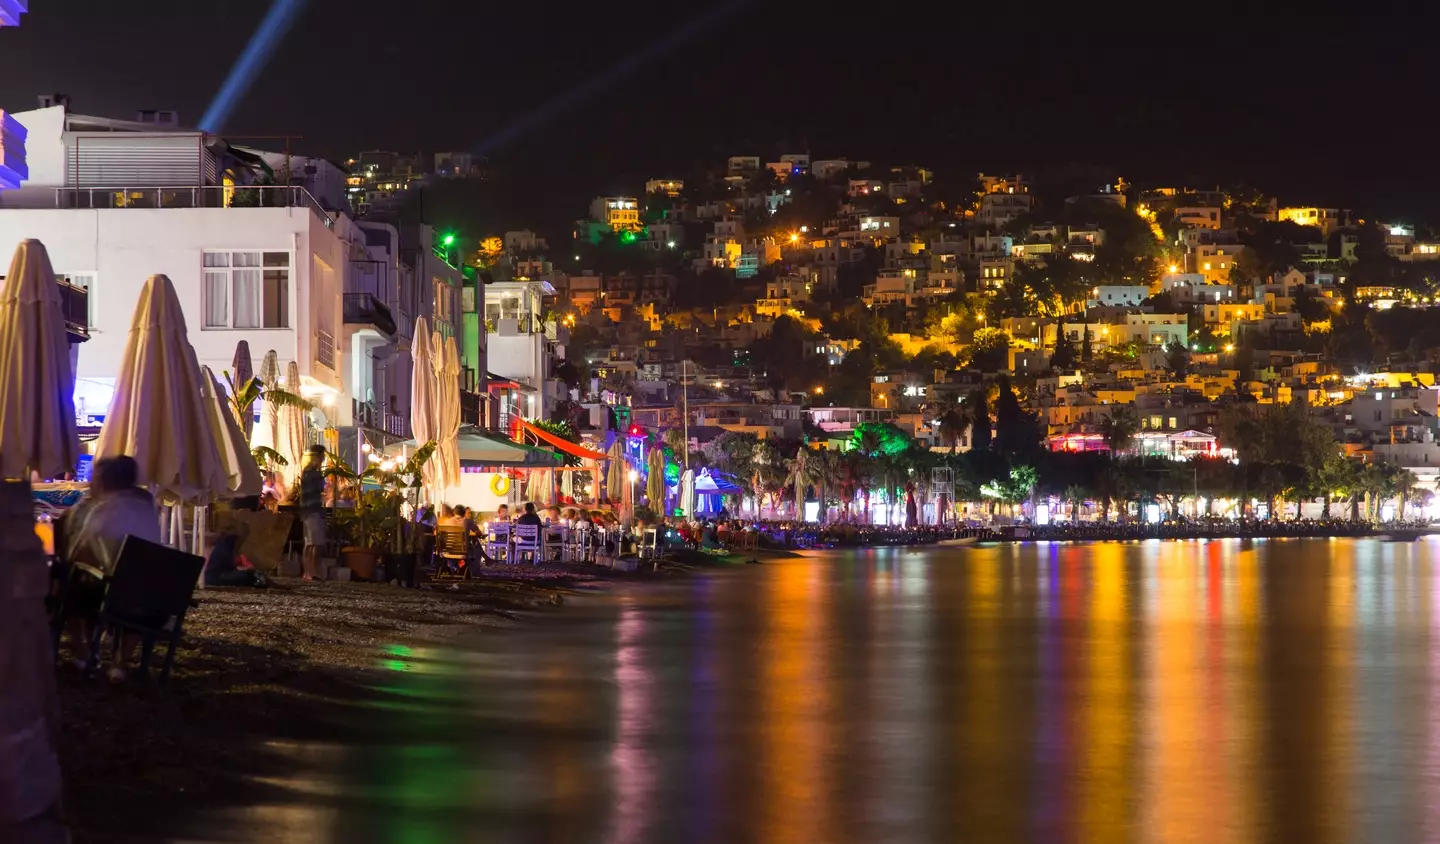 Many go to Bodrum for the nightlife.